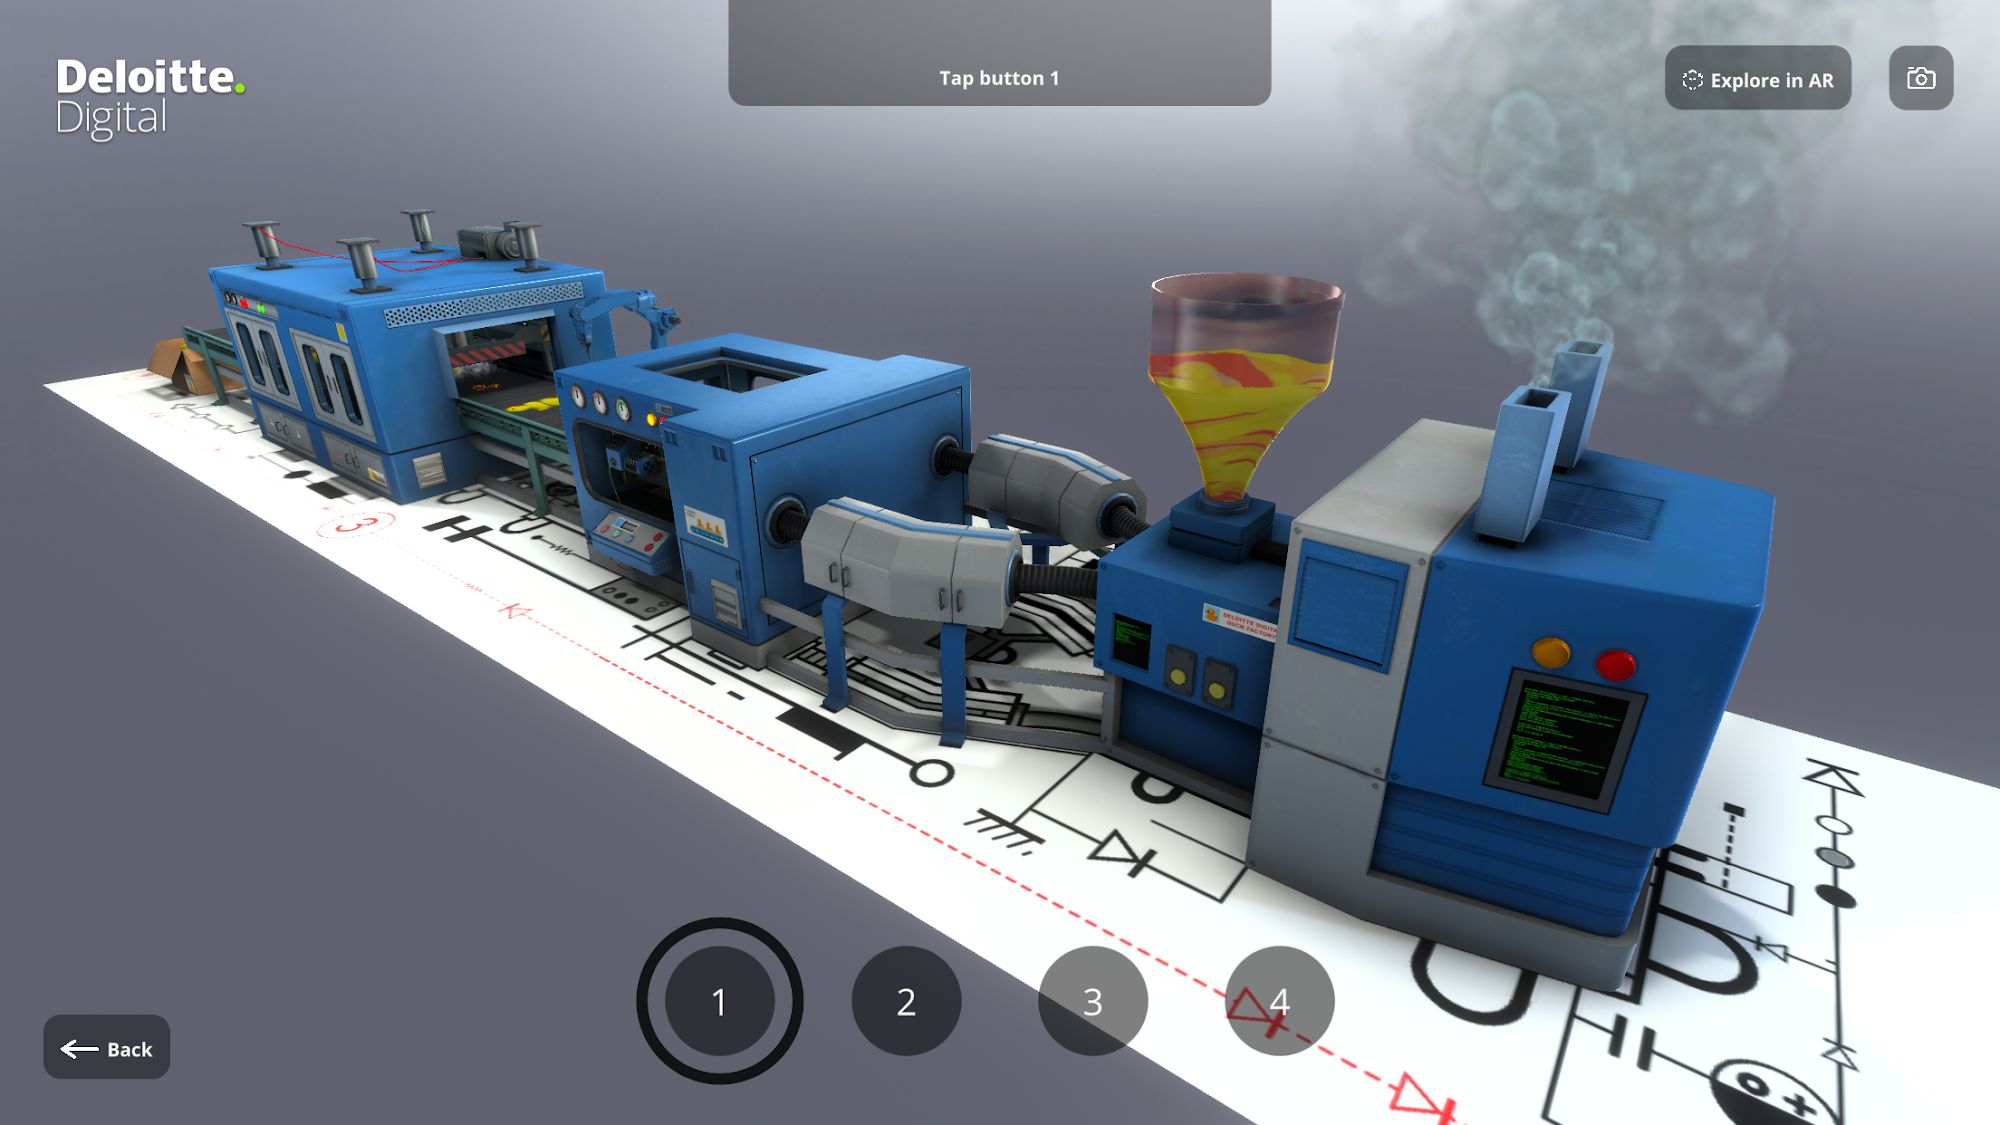 Virtual Factory by Deloitte - Android game screenshots.